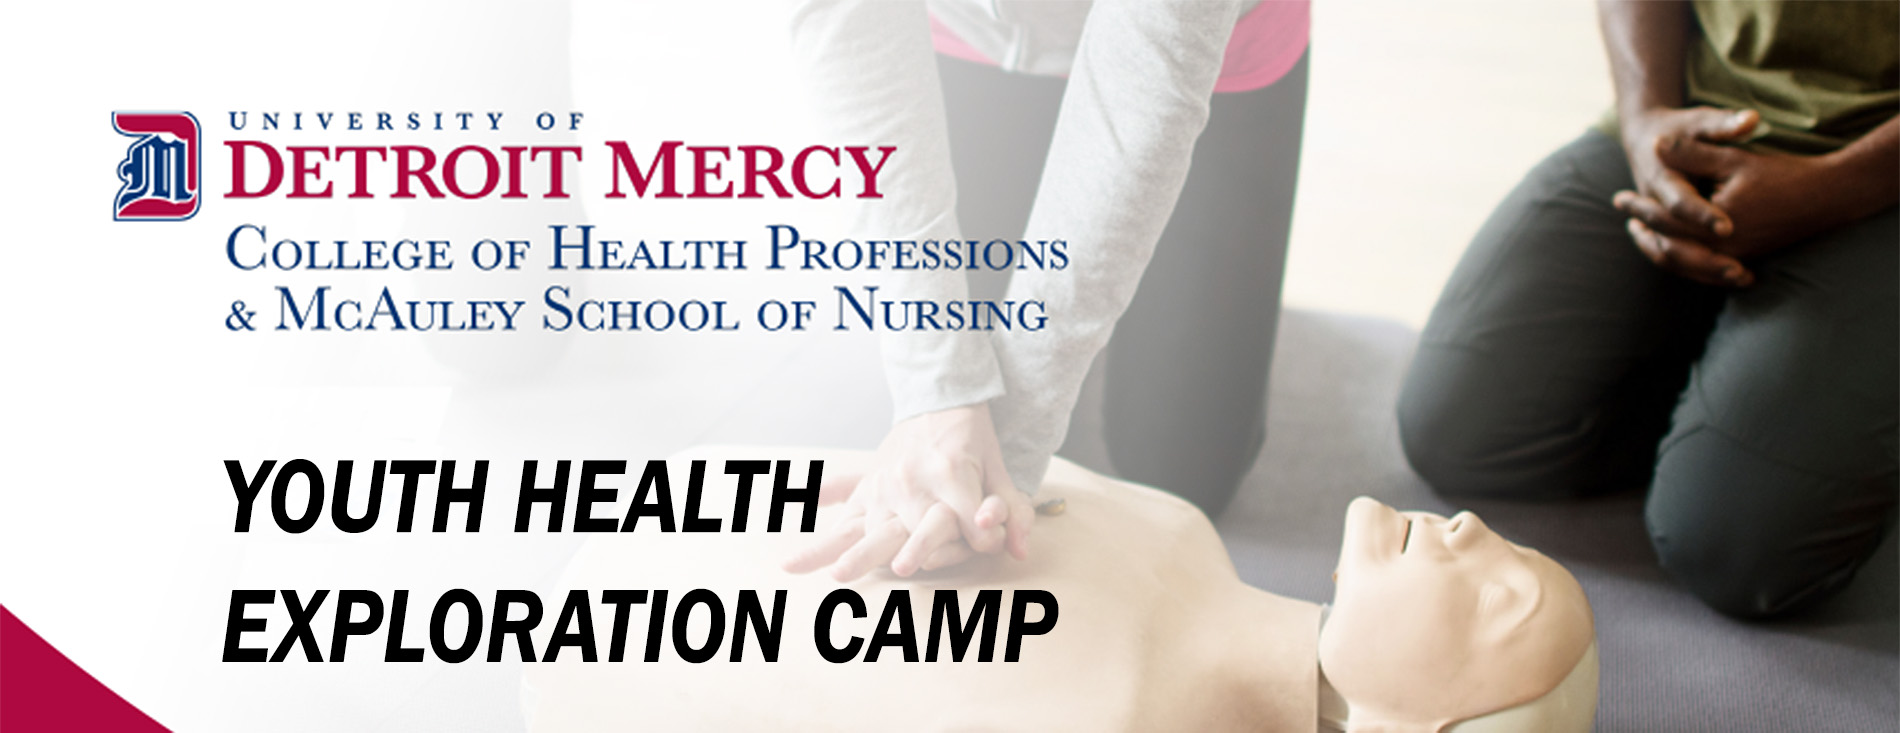 Youth Health Exploration Camp